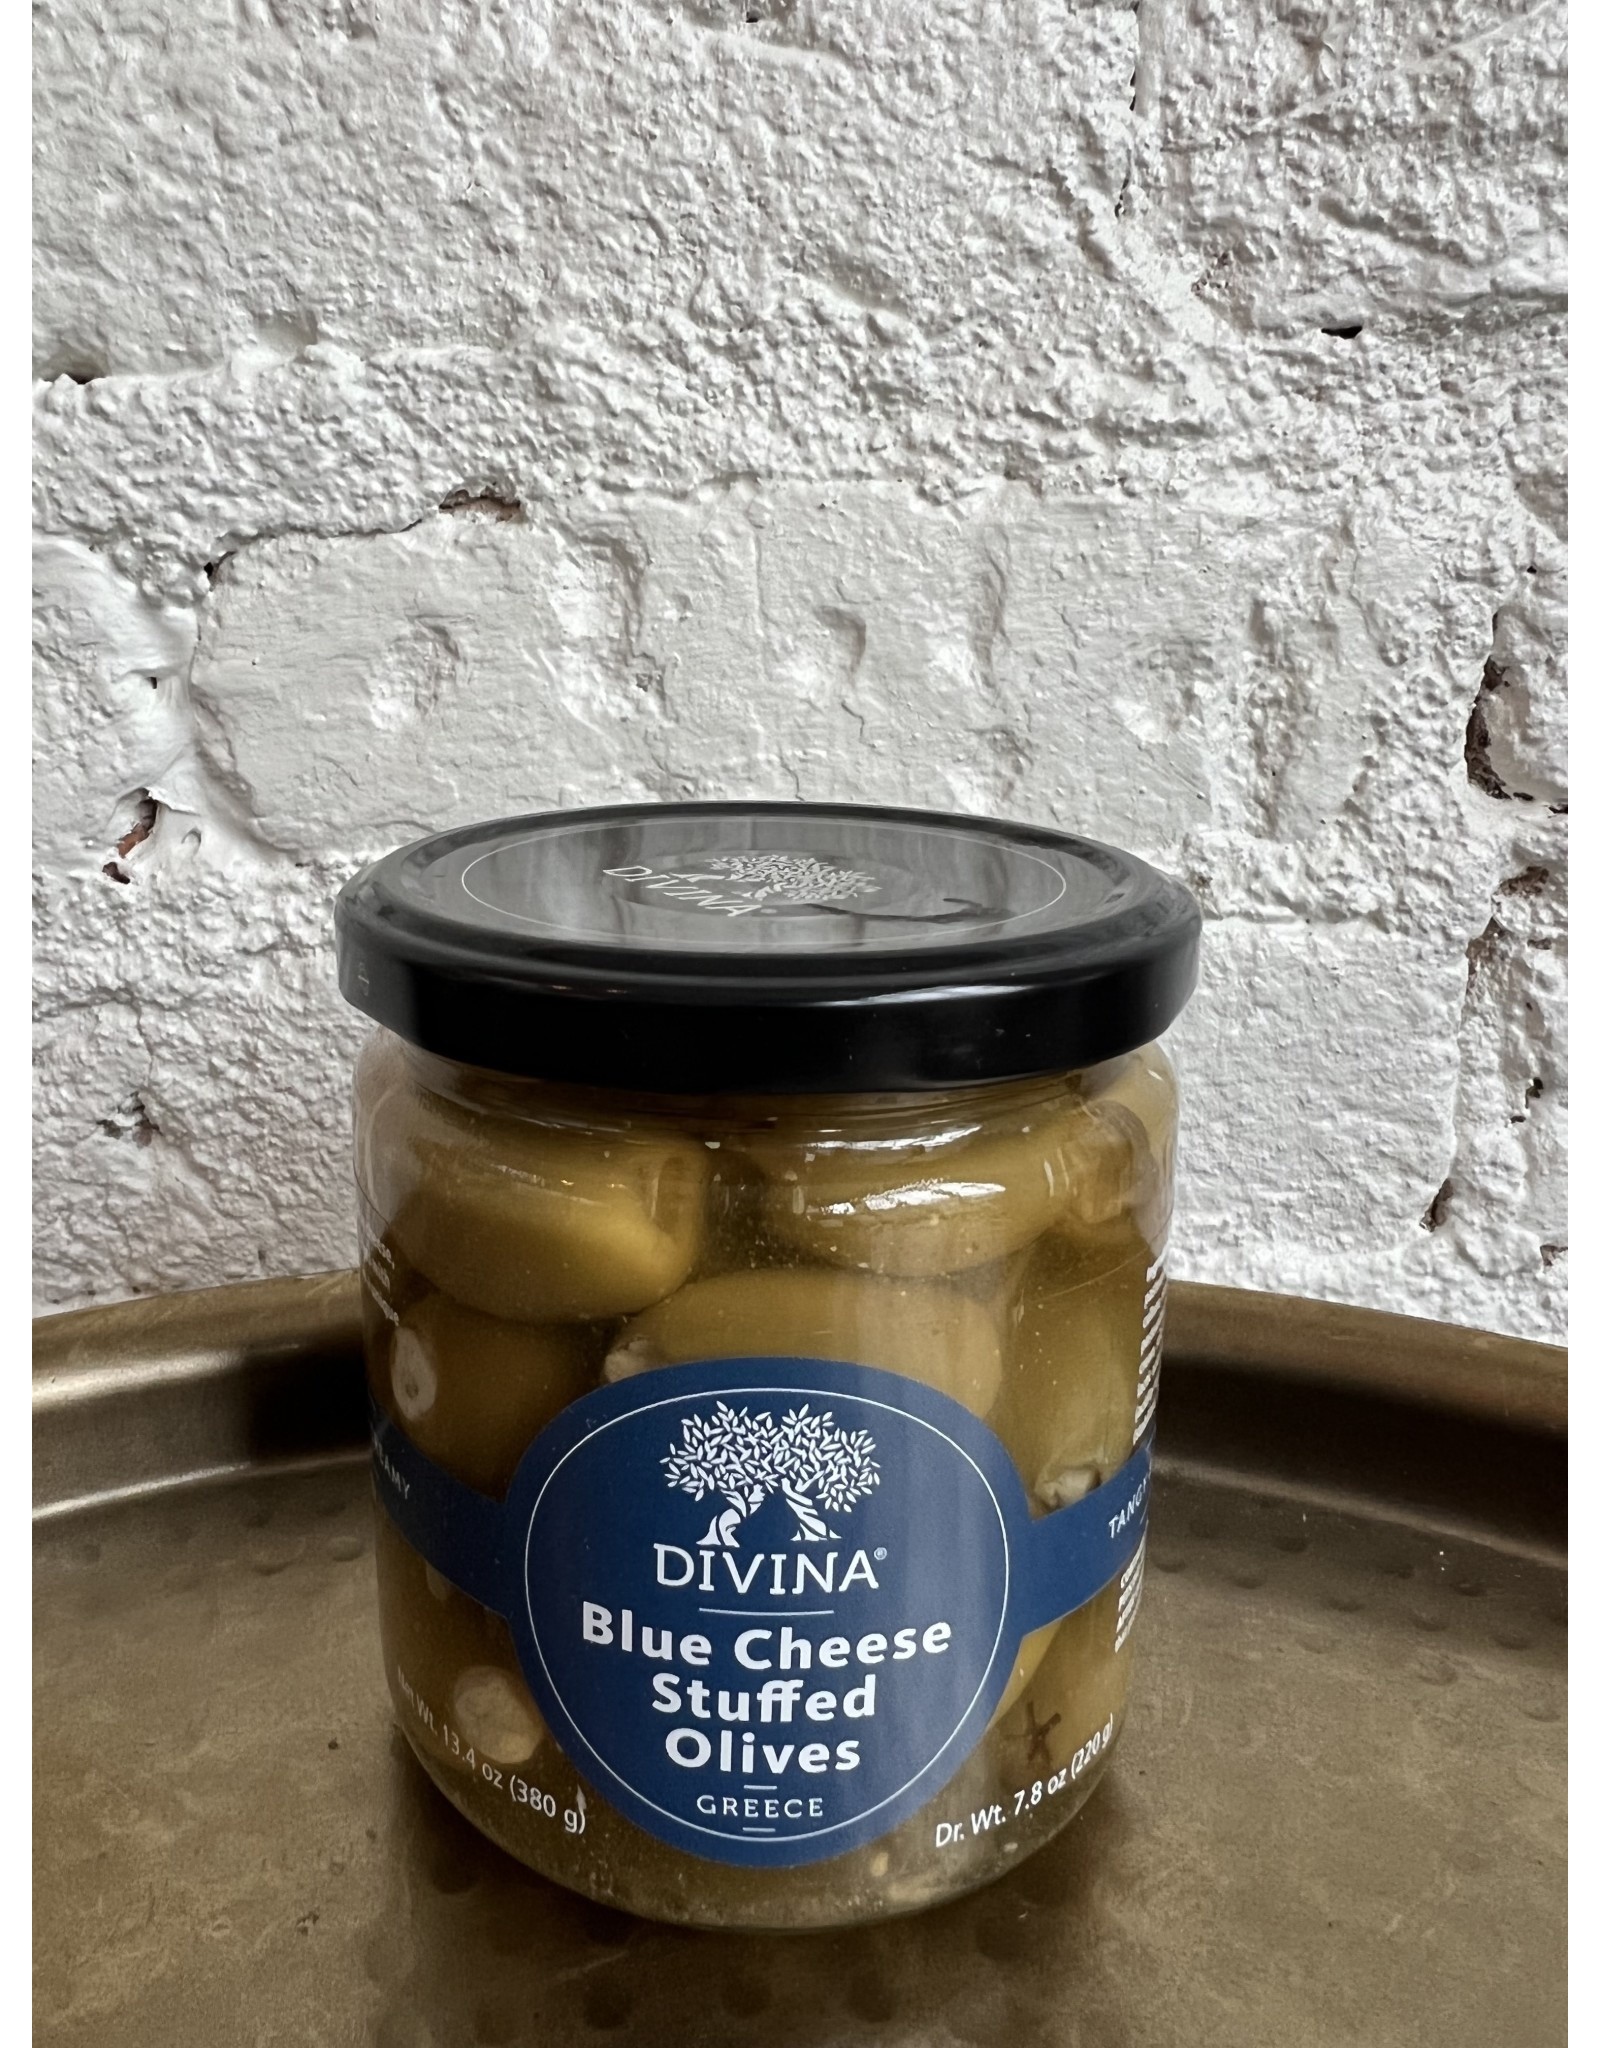 Divina Divina Blue Cheese Stuffed Olives